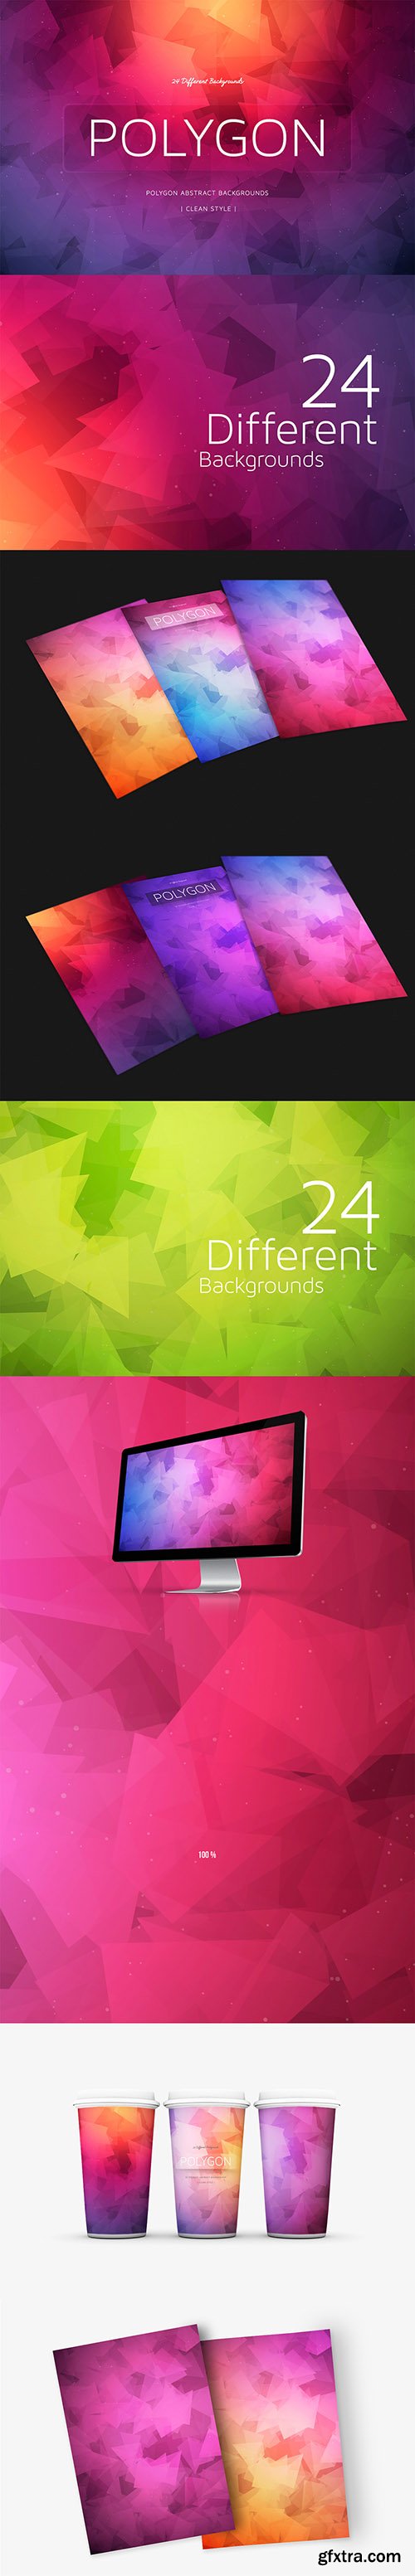 Textures - 24 Polygon Colorful Backgrounds